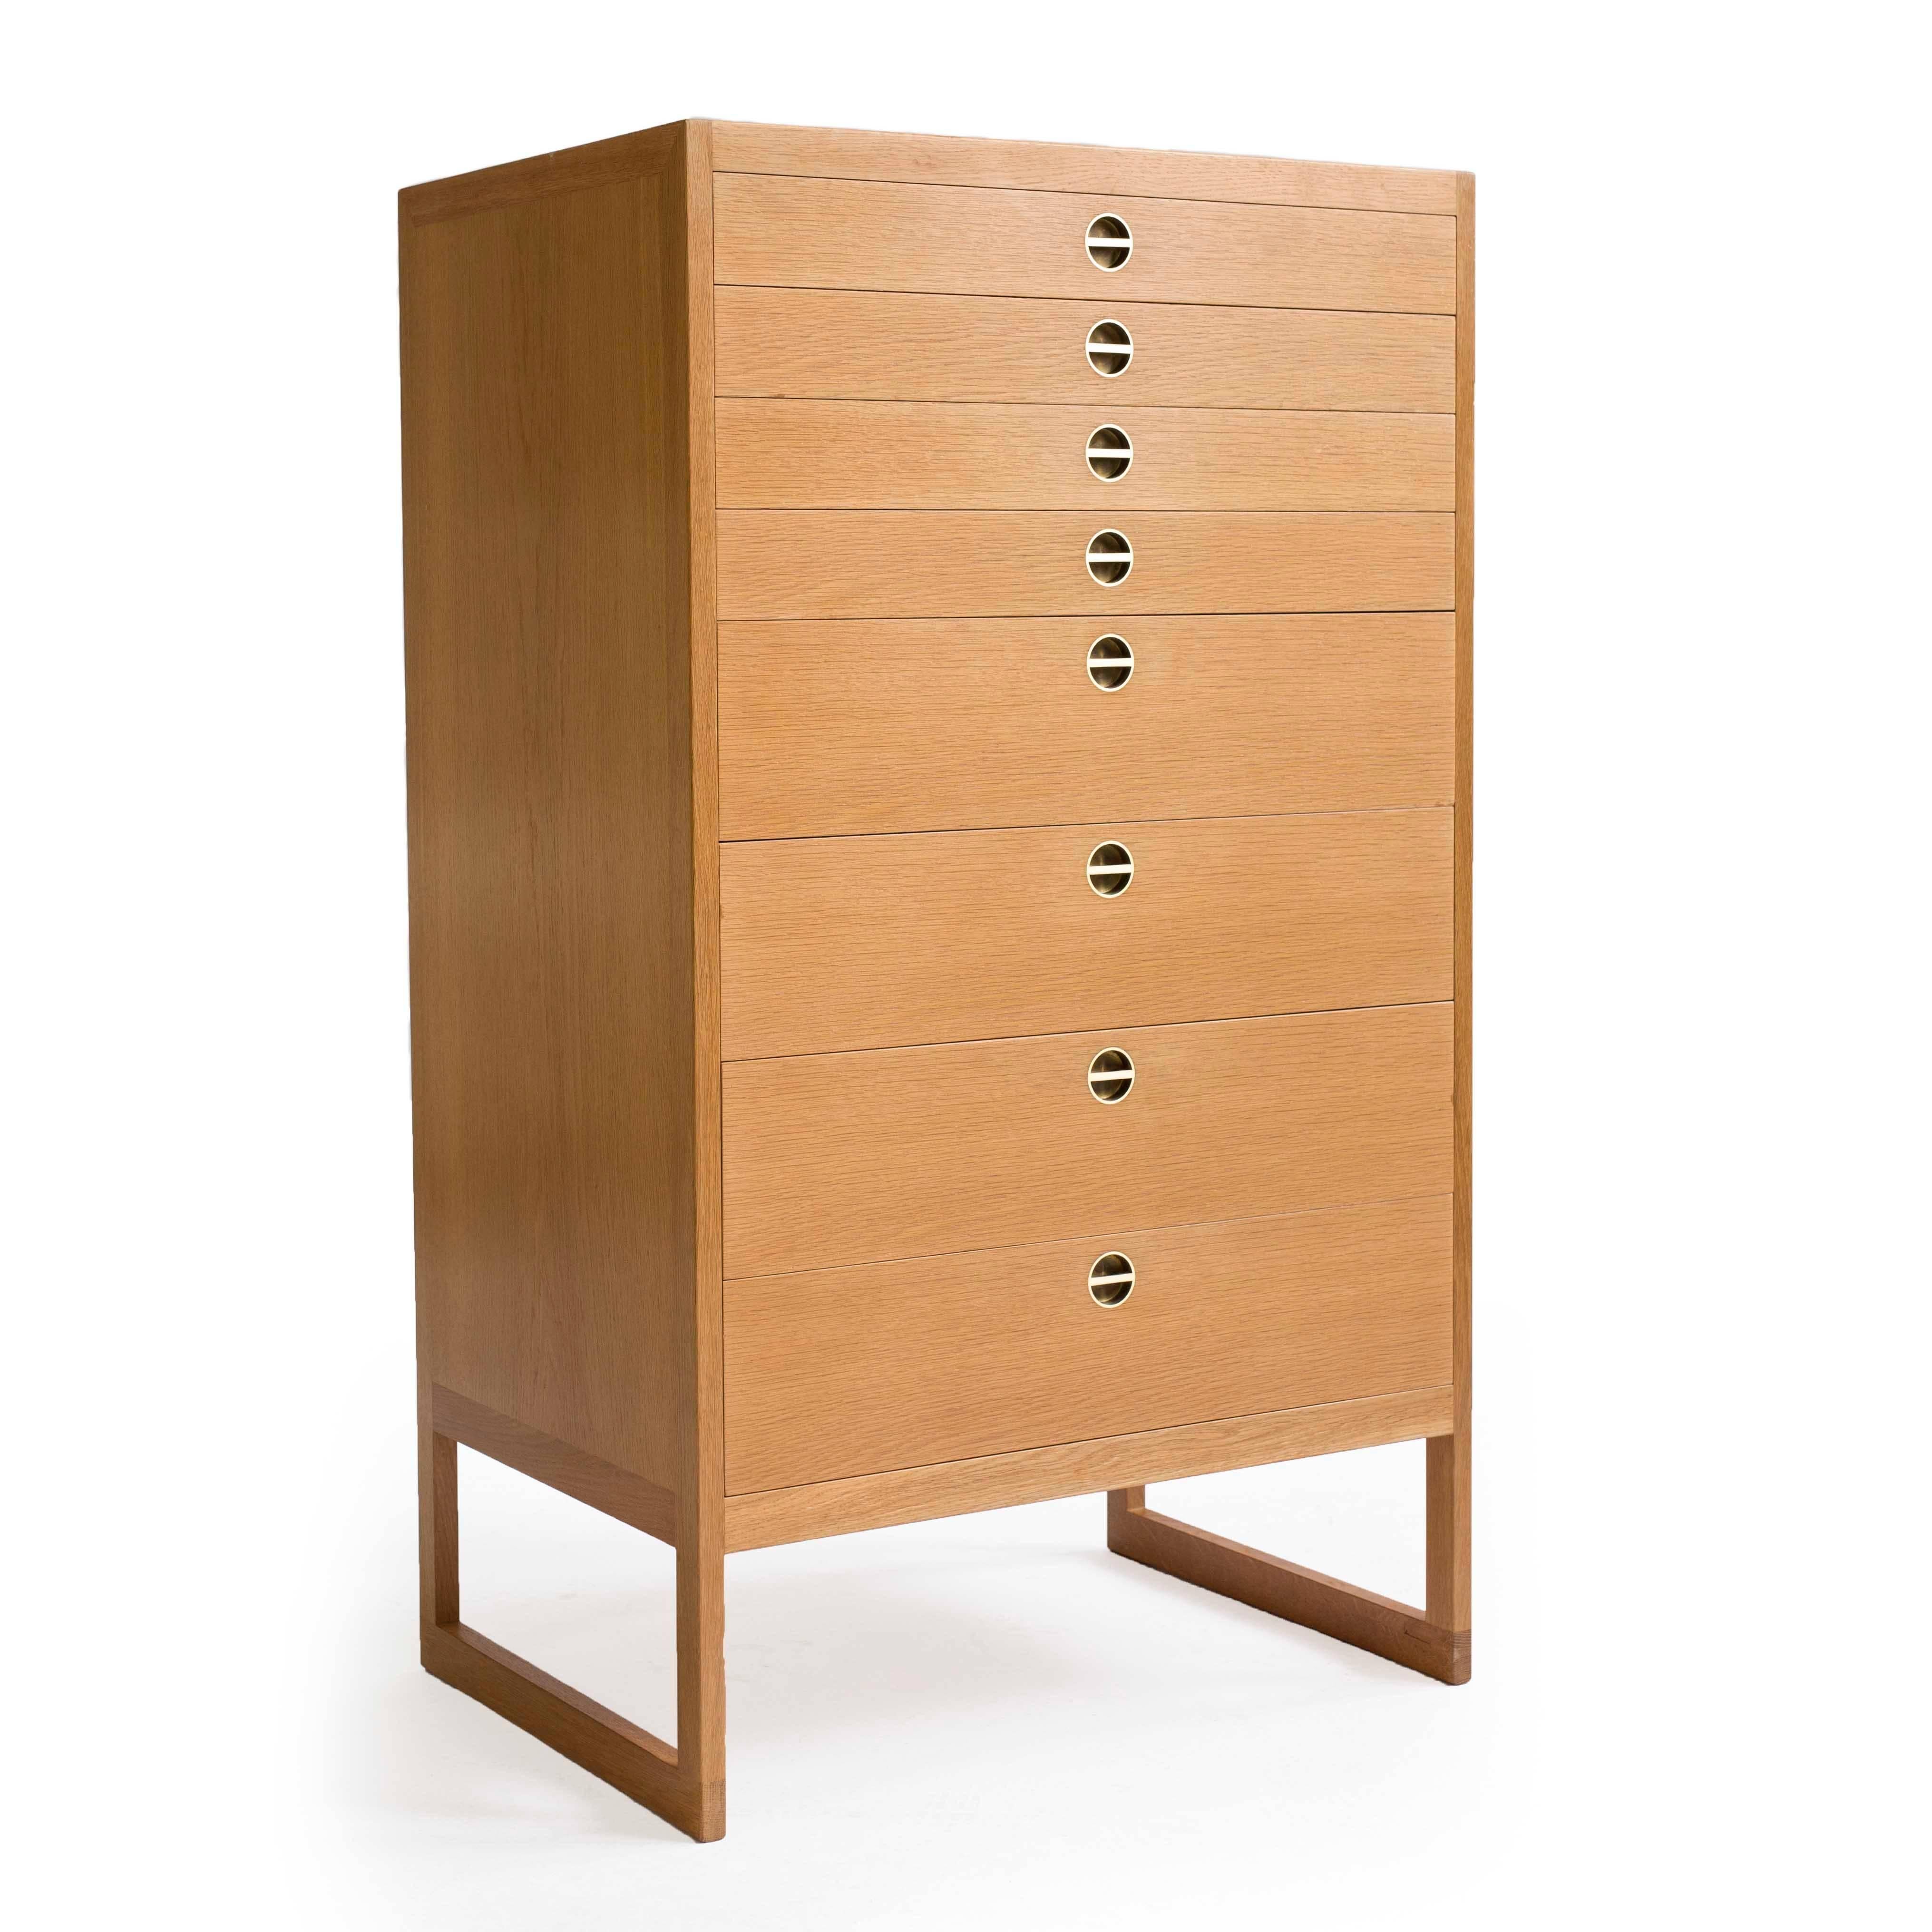 A Børge Mogensen oak chest of drawers. 

Front with four large and four small drawers and handles of brass.

Designed by Børge Mogensen 1957, manufactured by cabinetmaker P. Lauritsen & Son, Denmark model BM64. Very fine condition. 